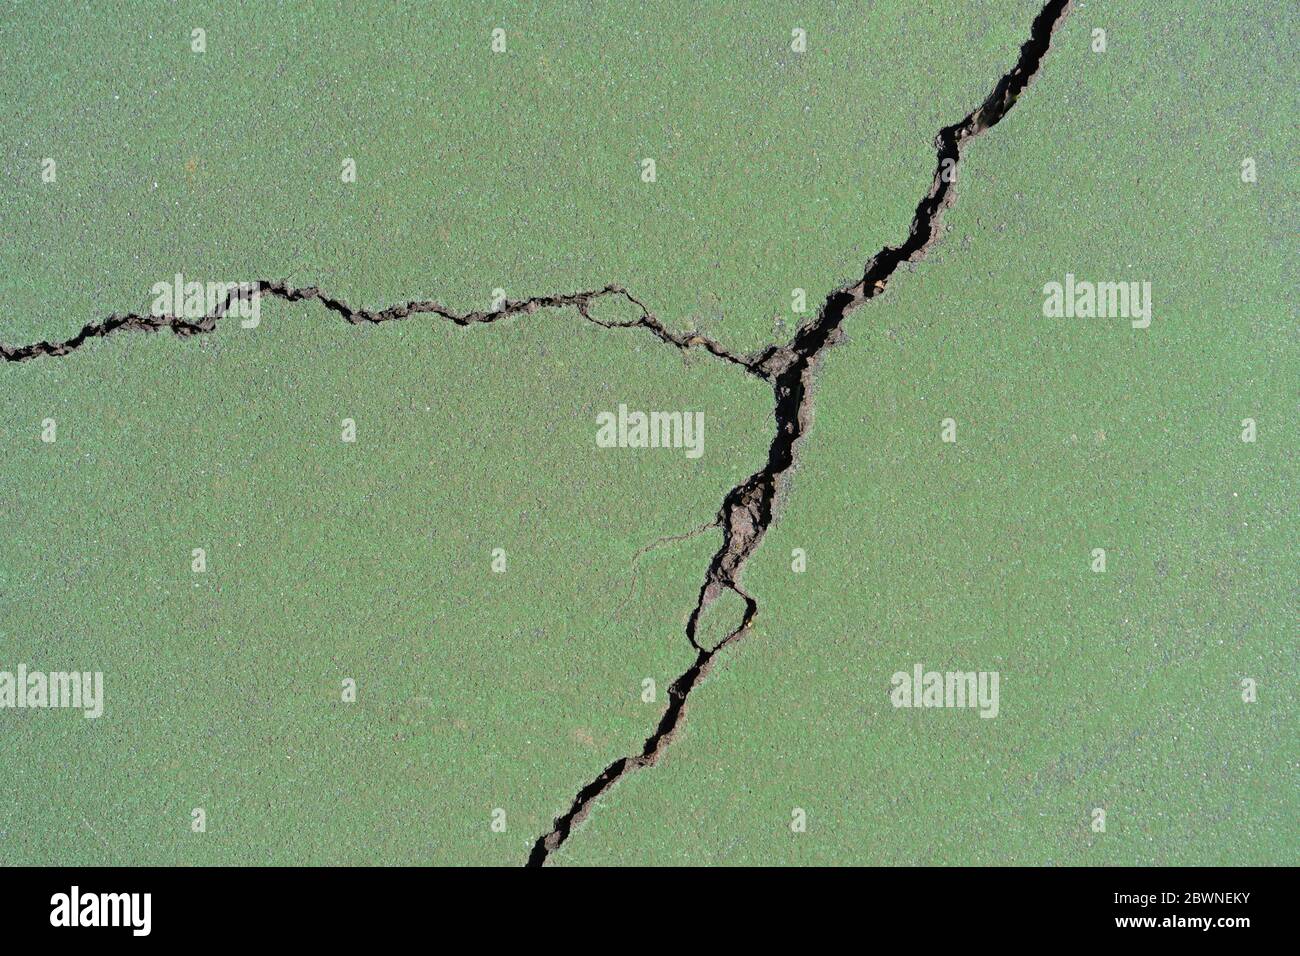 background of a crack in green painted blacktop of a tennis court Stock Photo